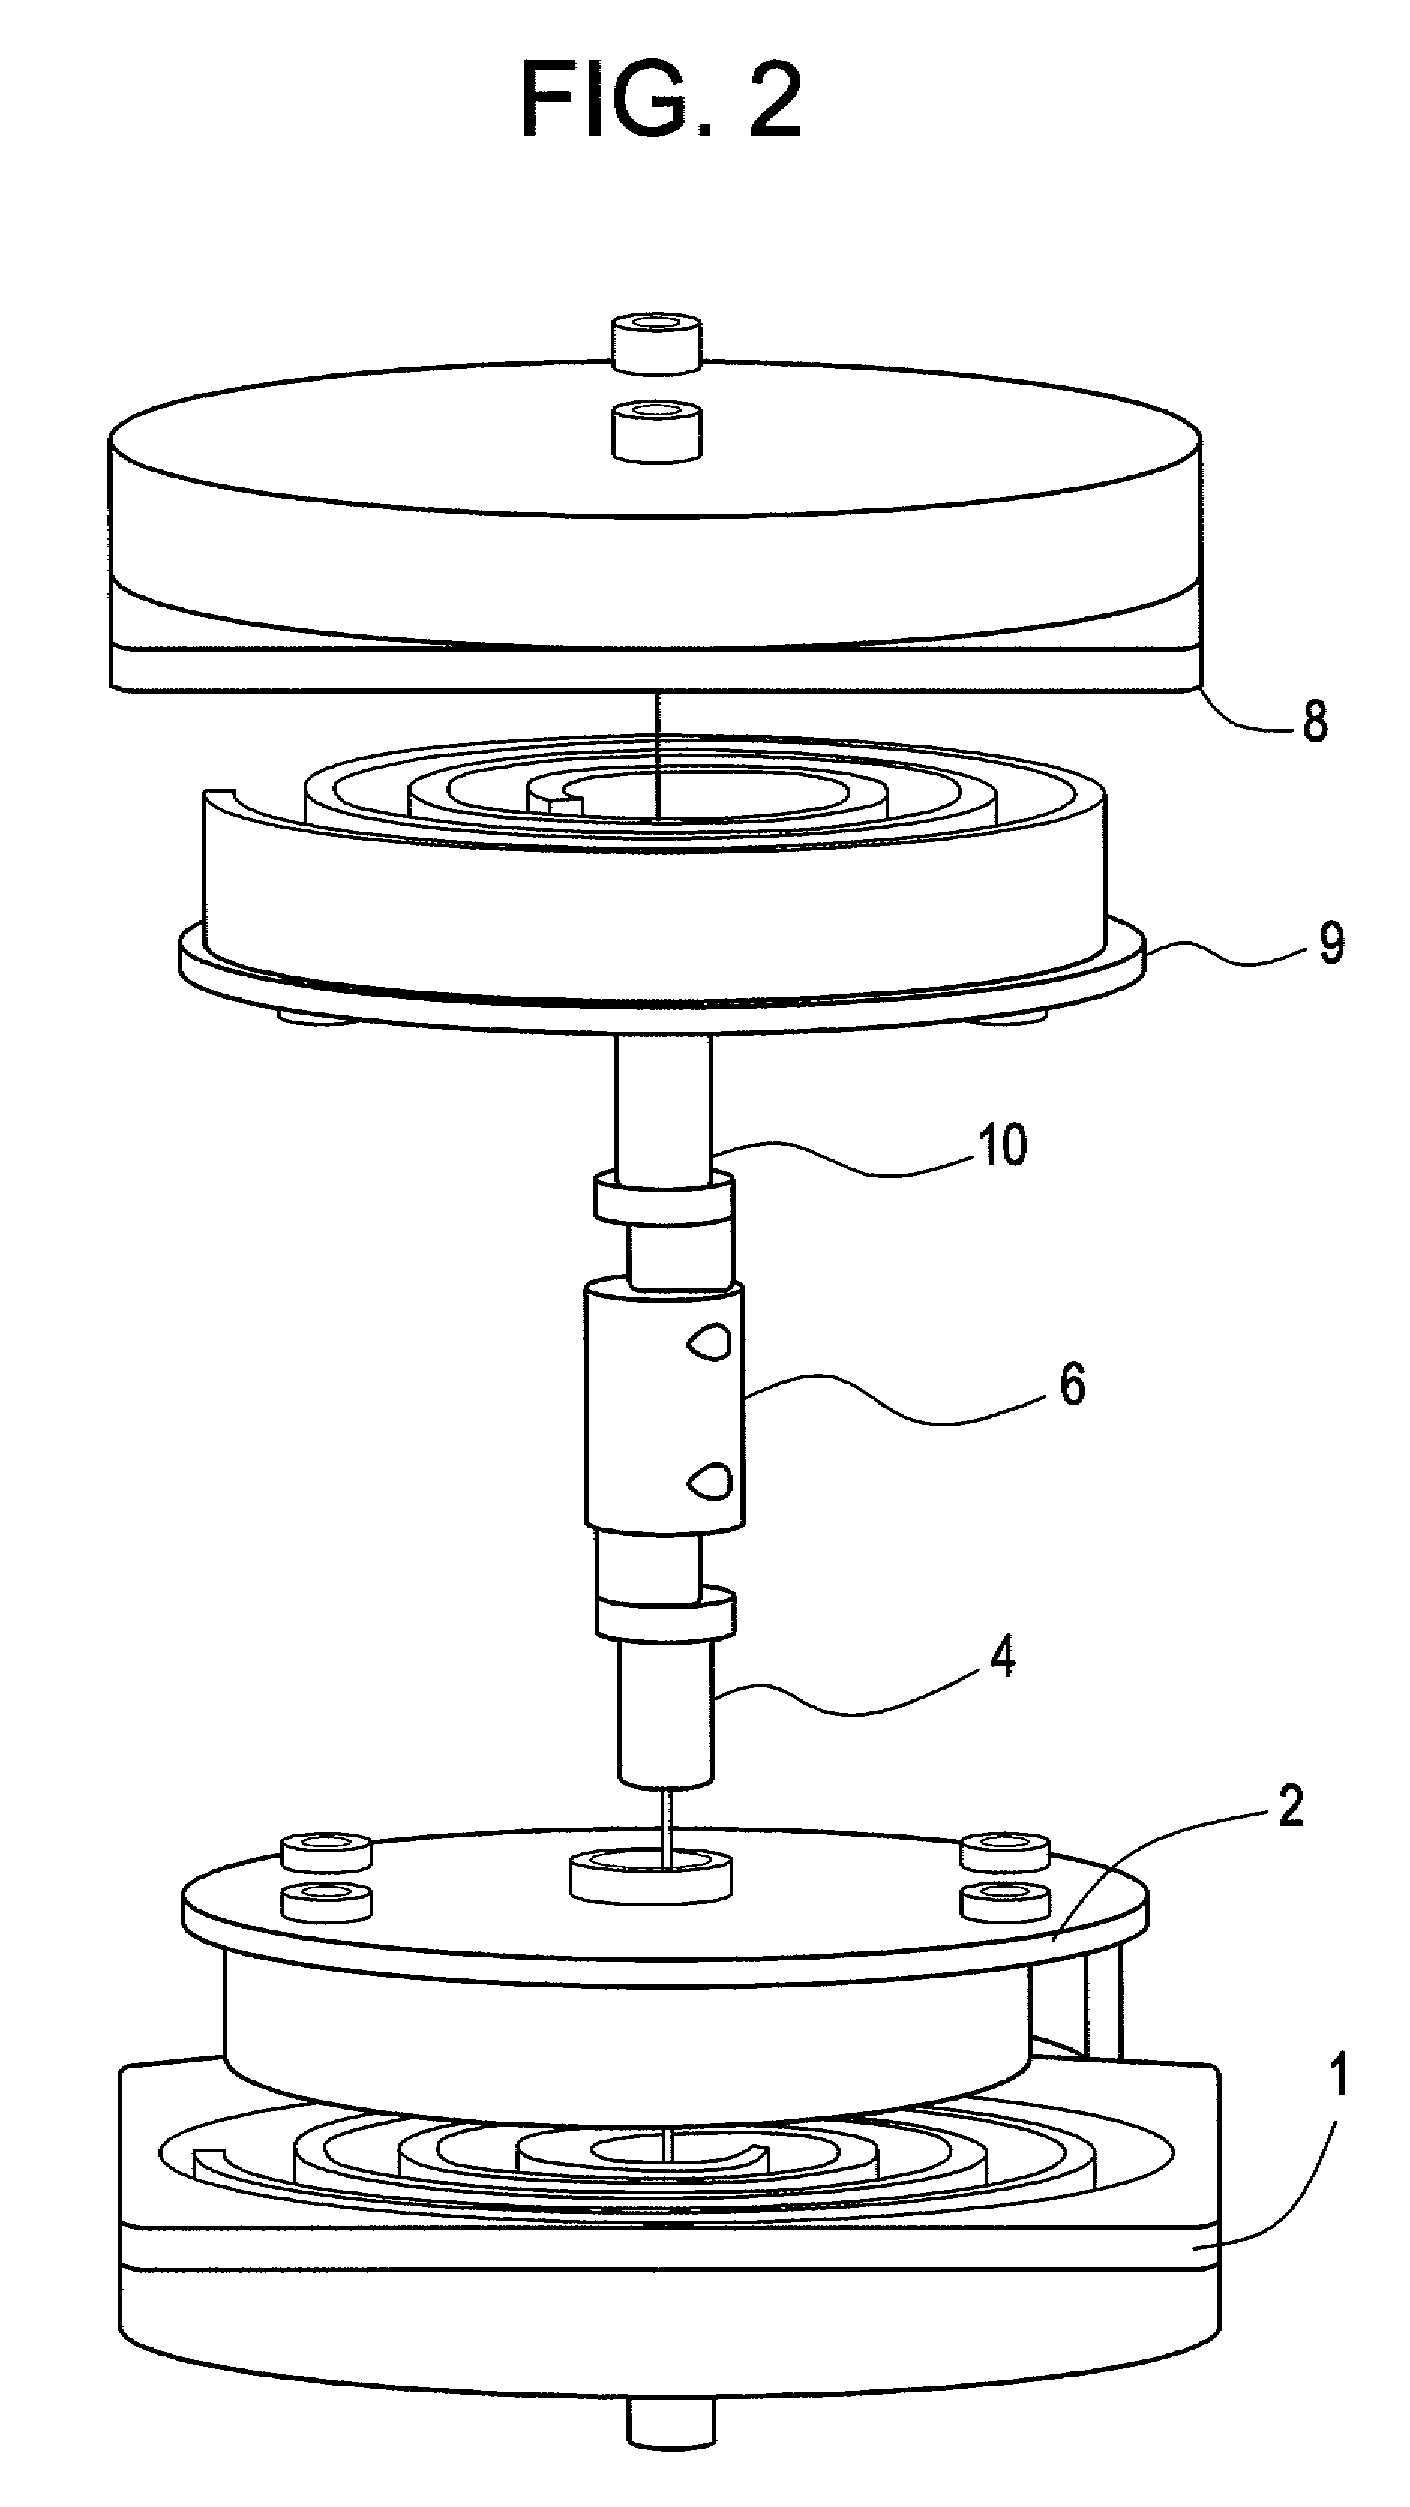 Asynchronous non-constant-pitch spiral scroll-type fluid displacement machine